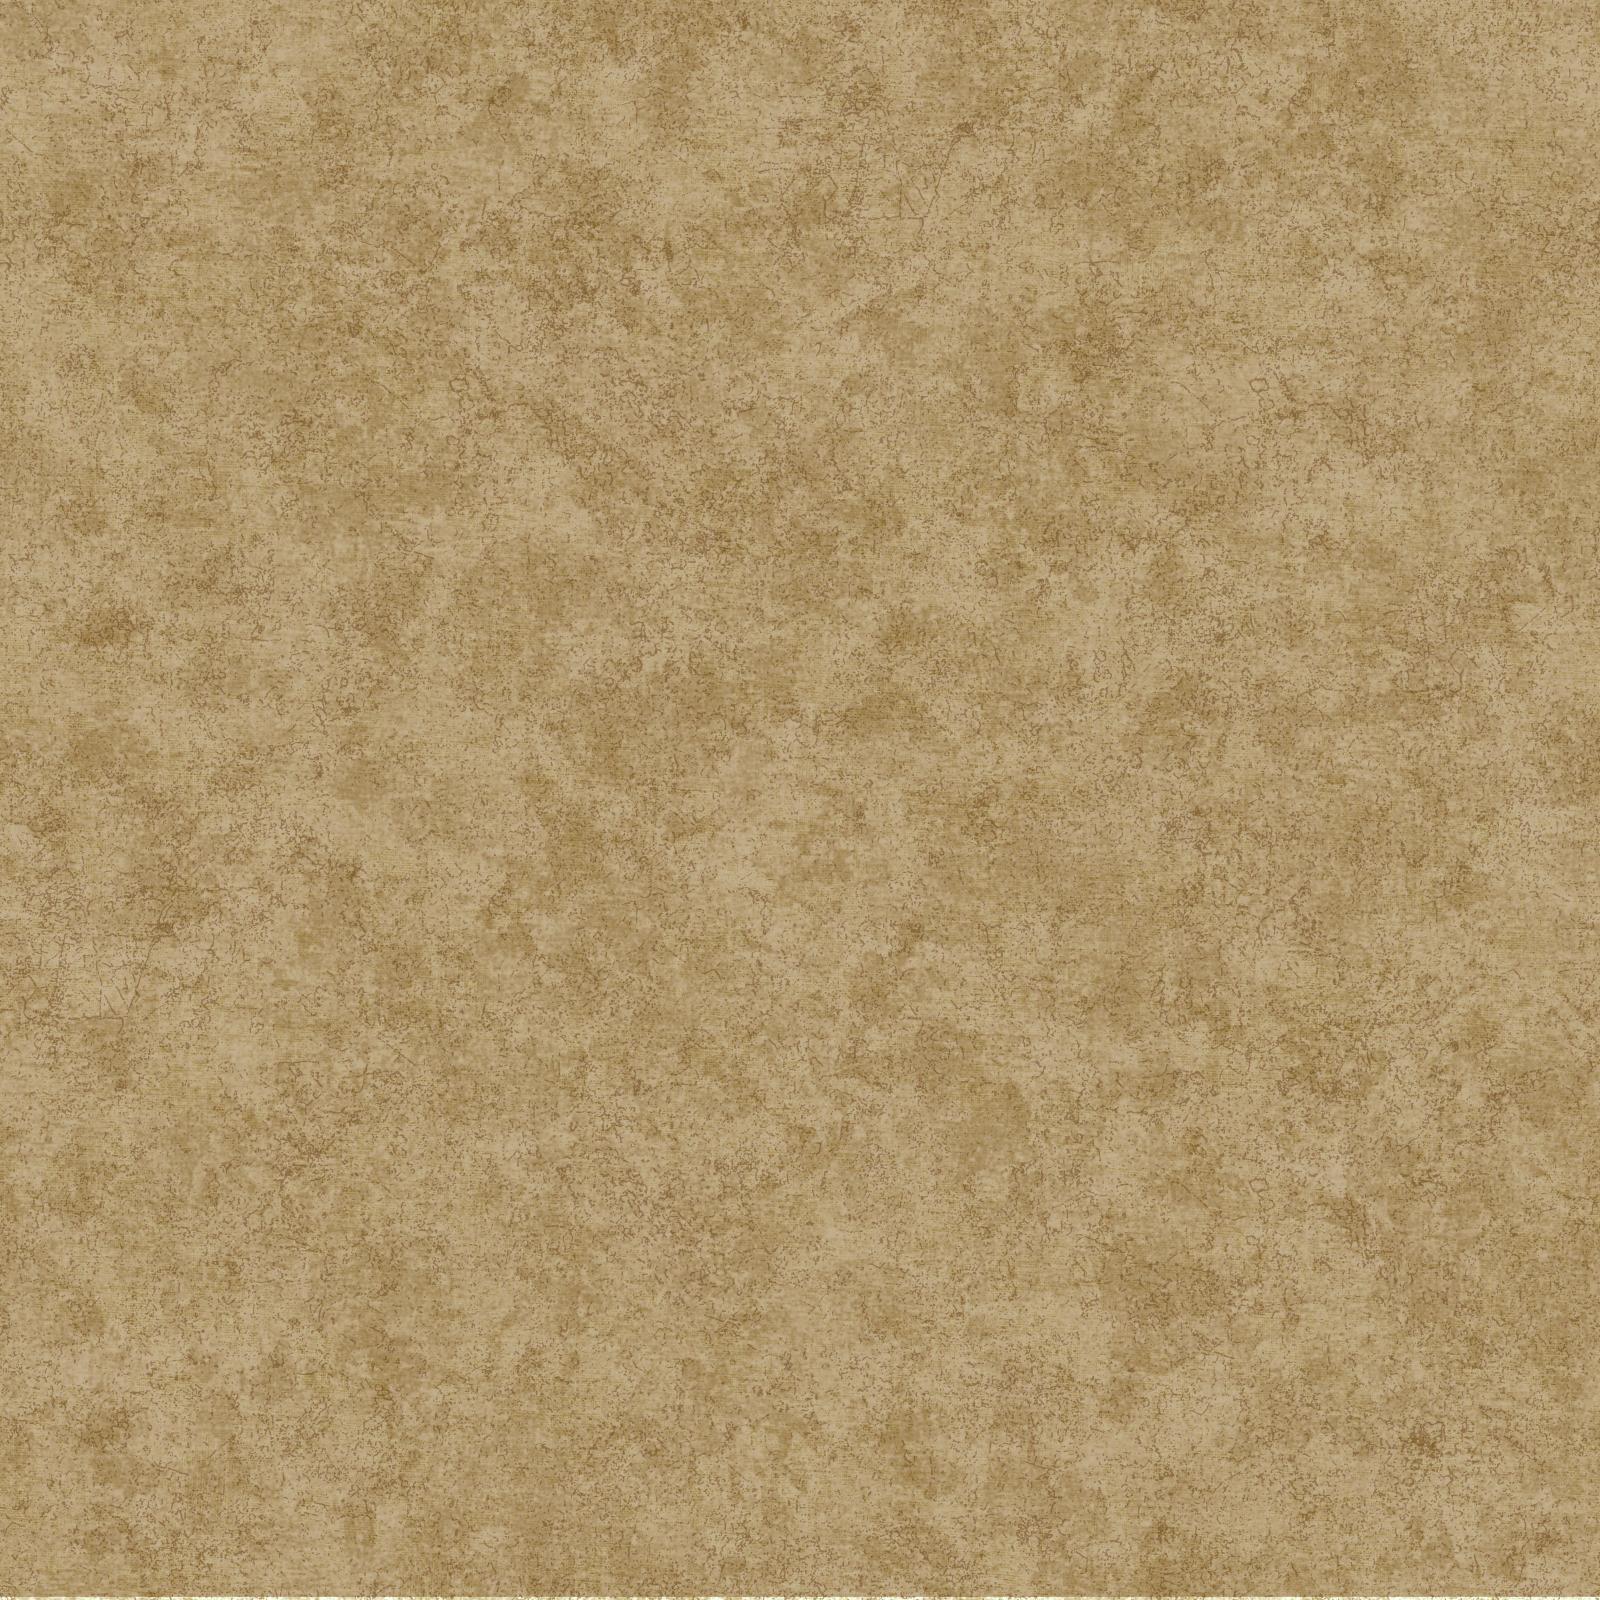 York Wallcoverings Impressions Distressed Damask Texture Wallpaper